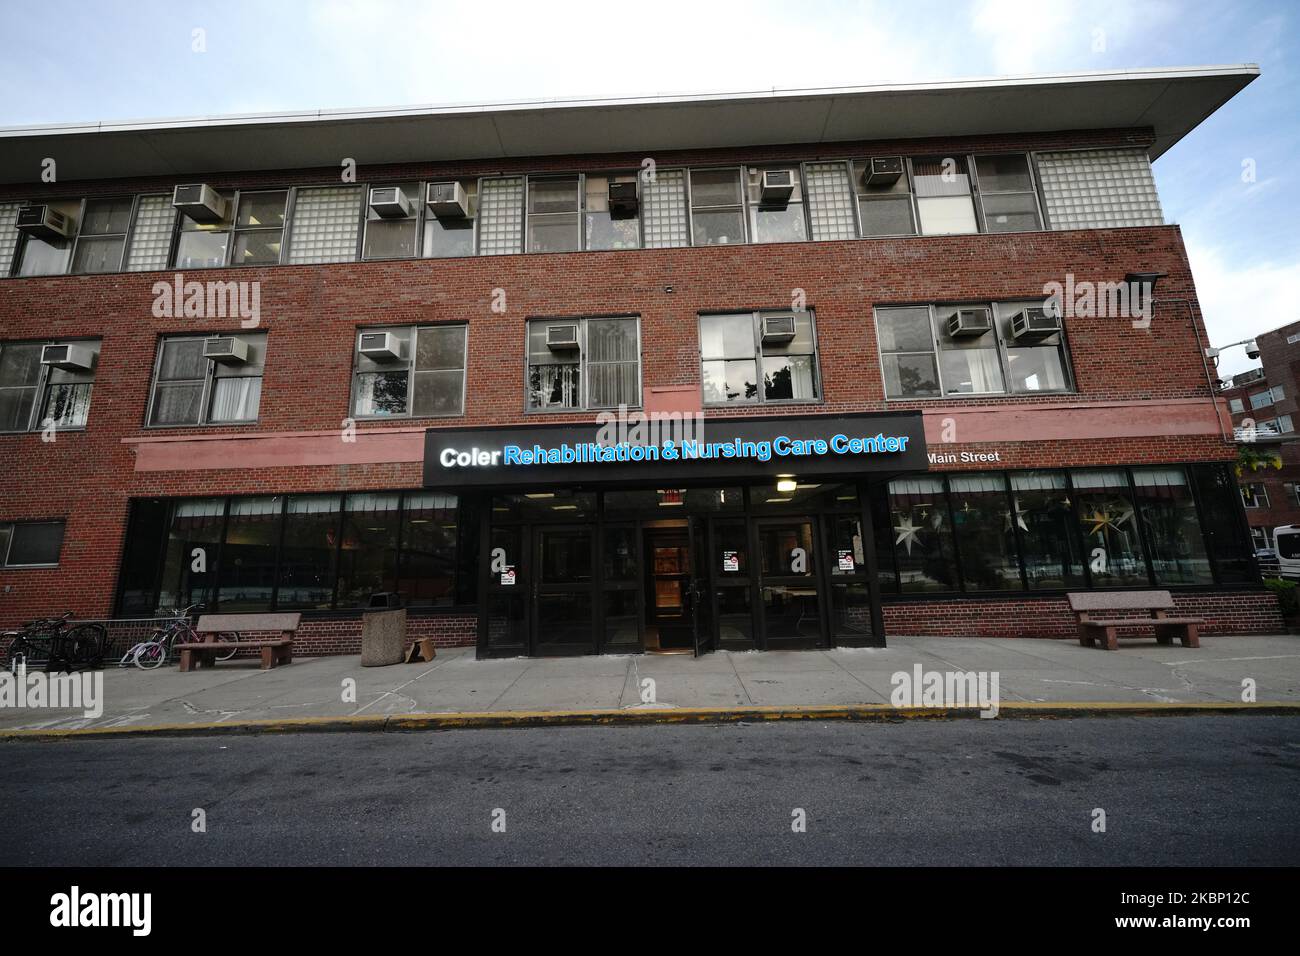 A view of NYC Health + Hospitals/Coler in Randall’s during the coronavirus pandemic on May 18, 2020 in New York City. COVID-19 has spread to most countries around the world, claiming over 316,000 lives with over 4.8 million infections reported. NYC under fire for placing COVID-19 patients in nursing home. (Photo by John Nacion/NurPhoto) Stock Photo